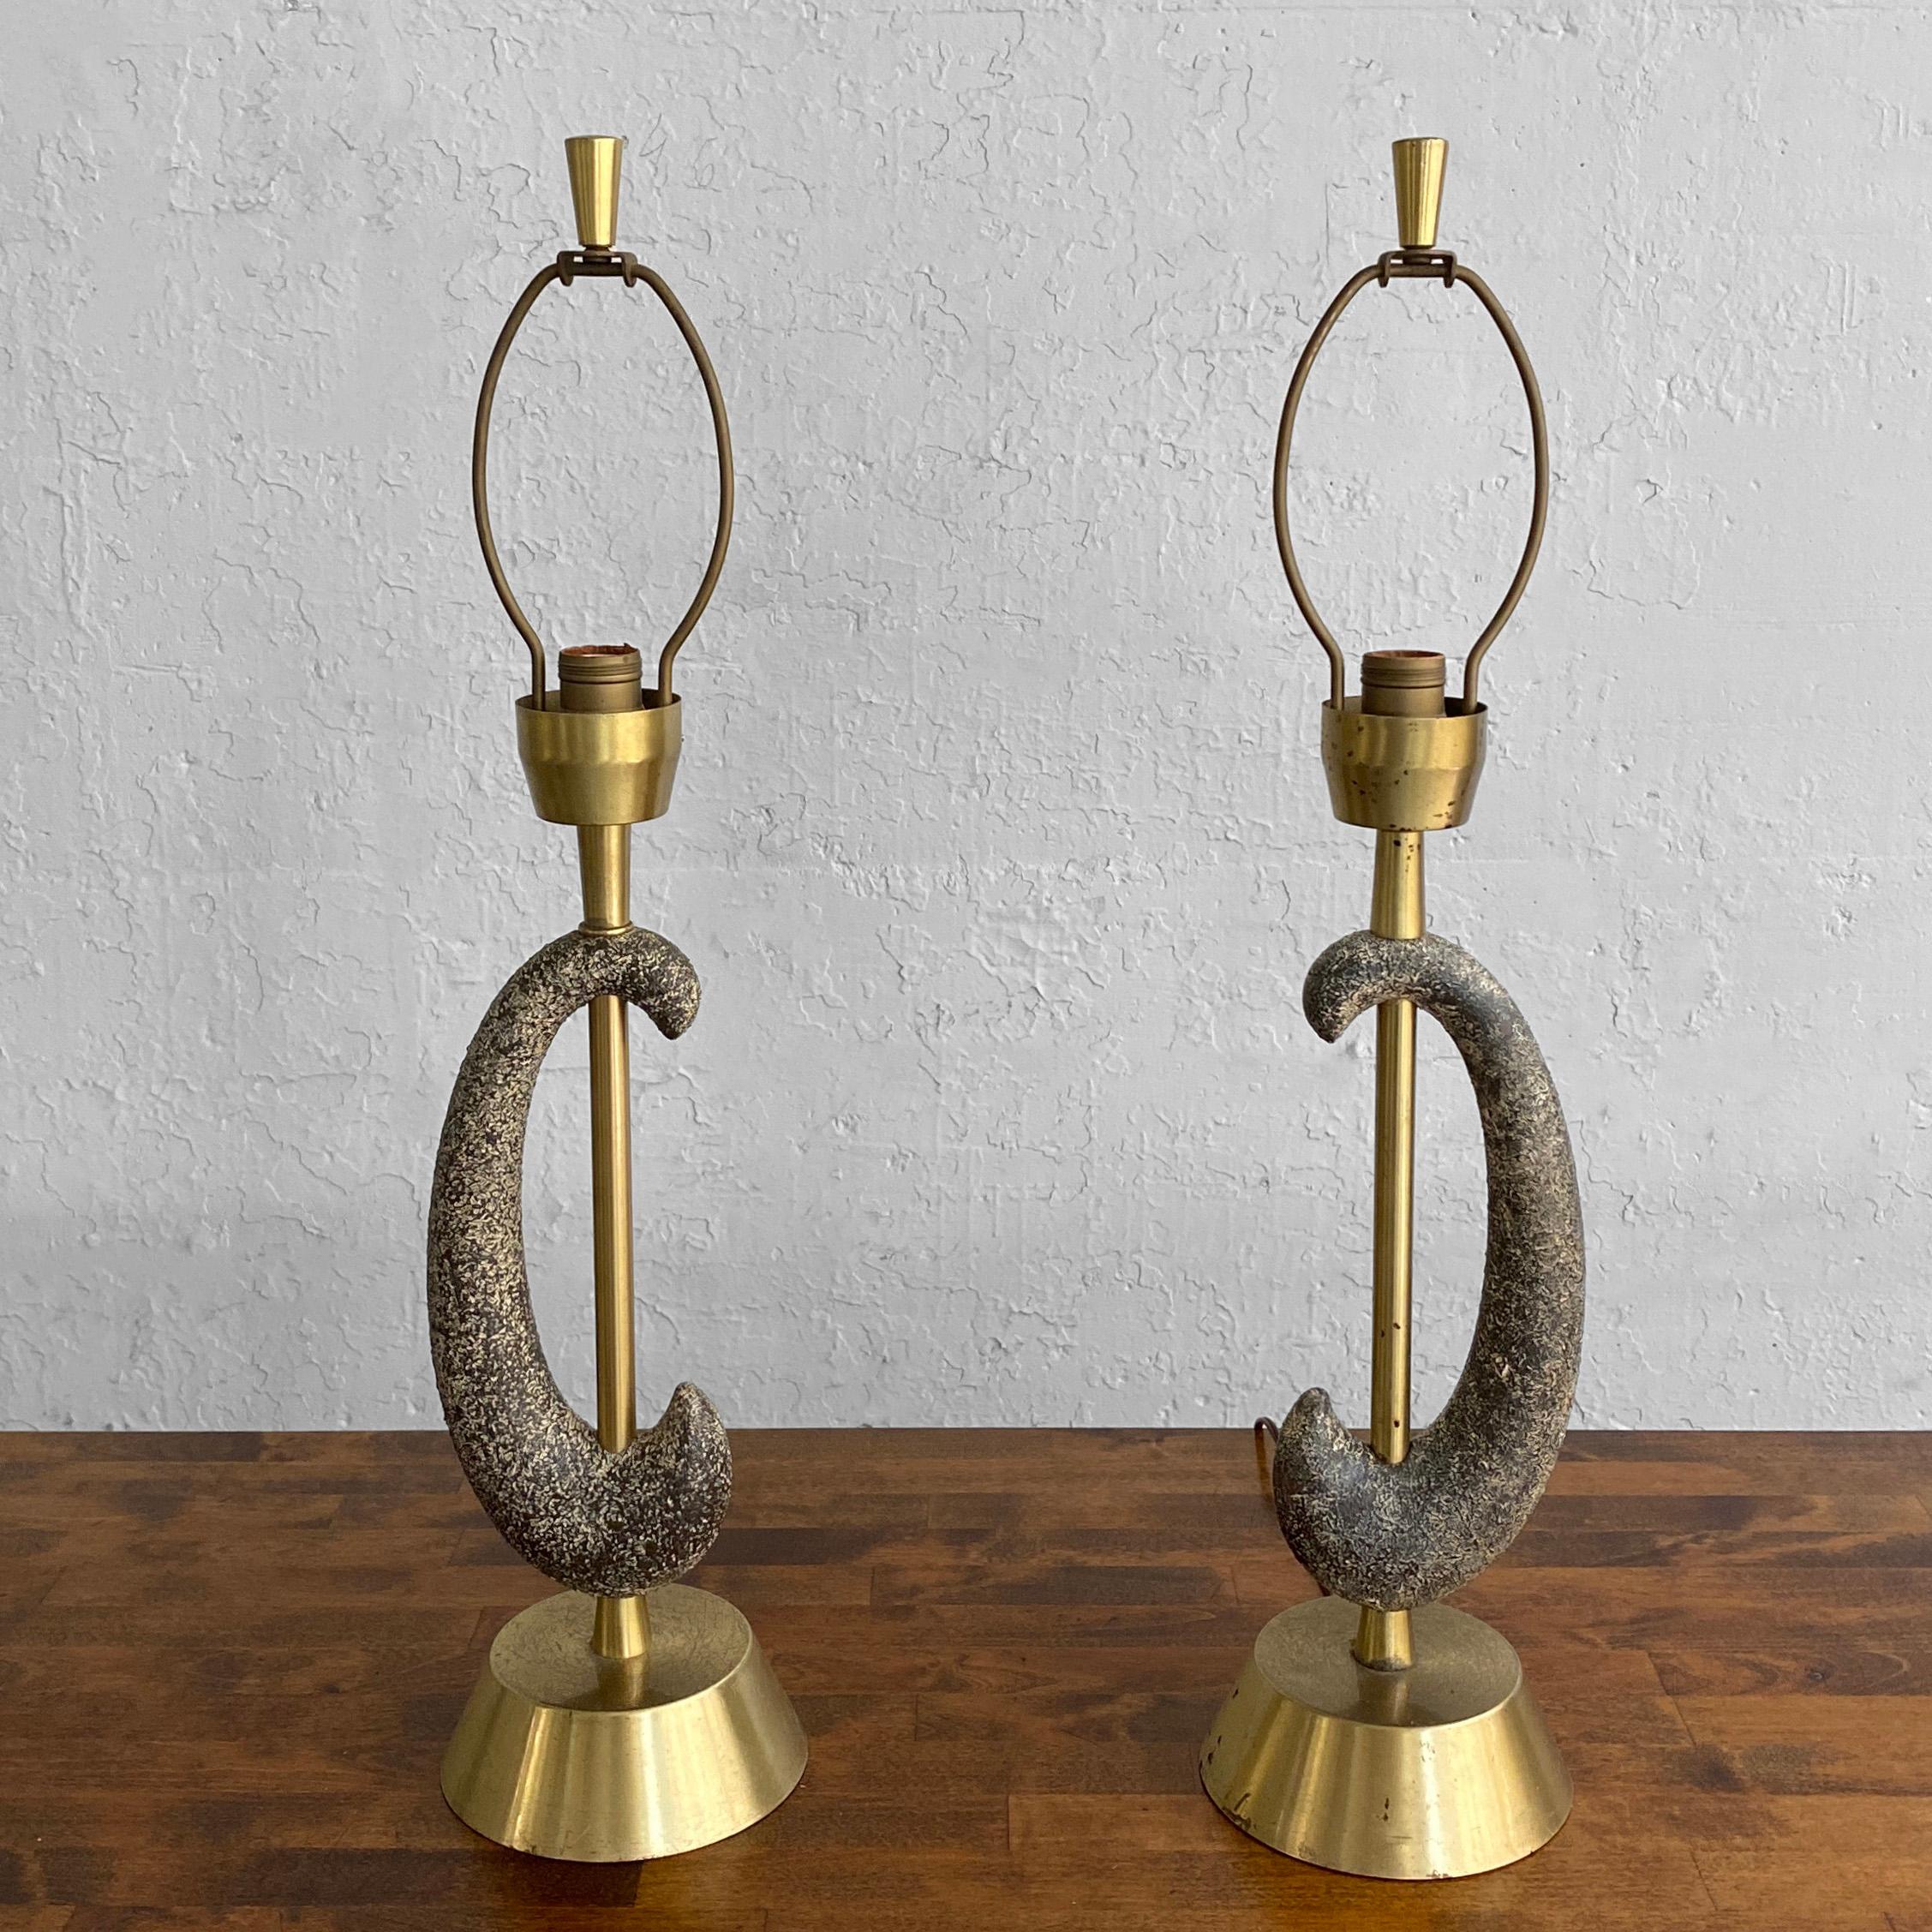 Interesting pair of mid century modern, table lamps by Kelby feature brass bases, stems and original finials with intersecting, black and white, course-graned, ceramic arcs.